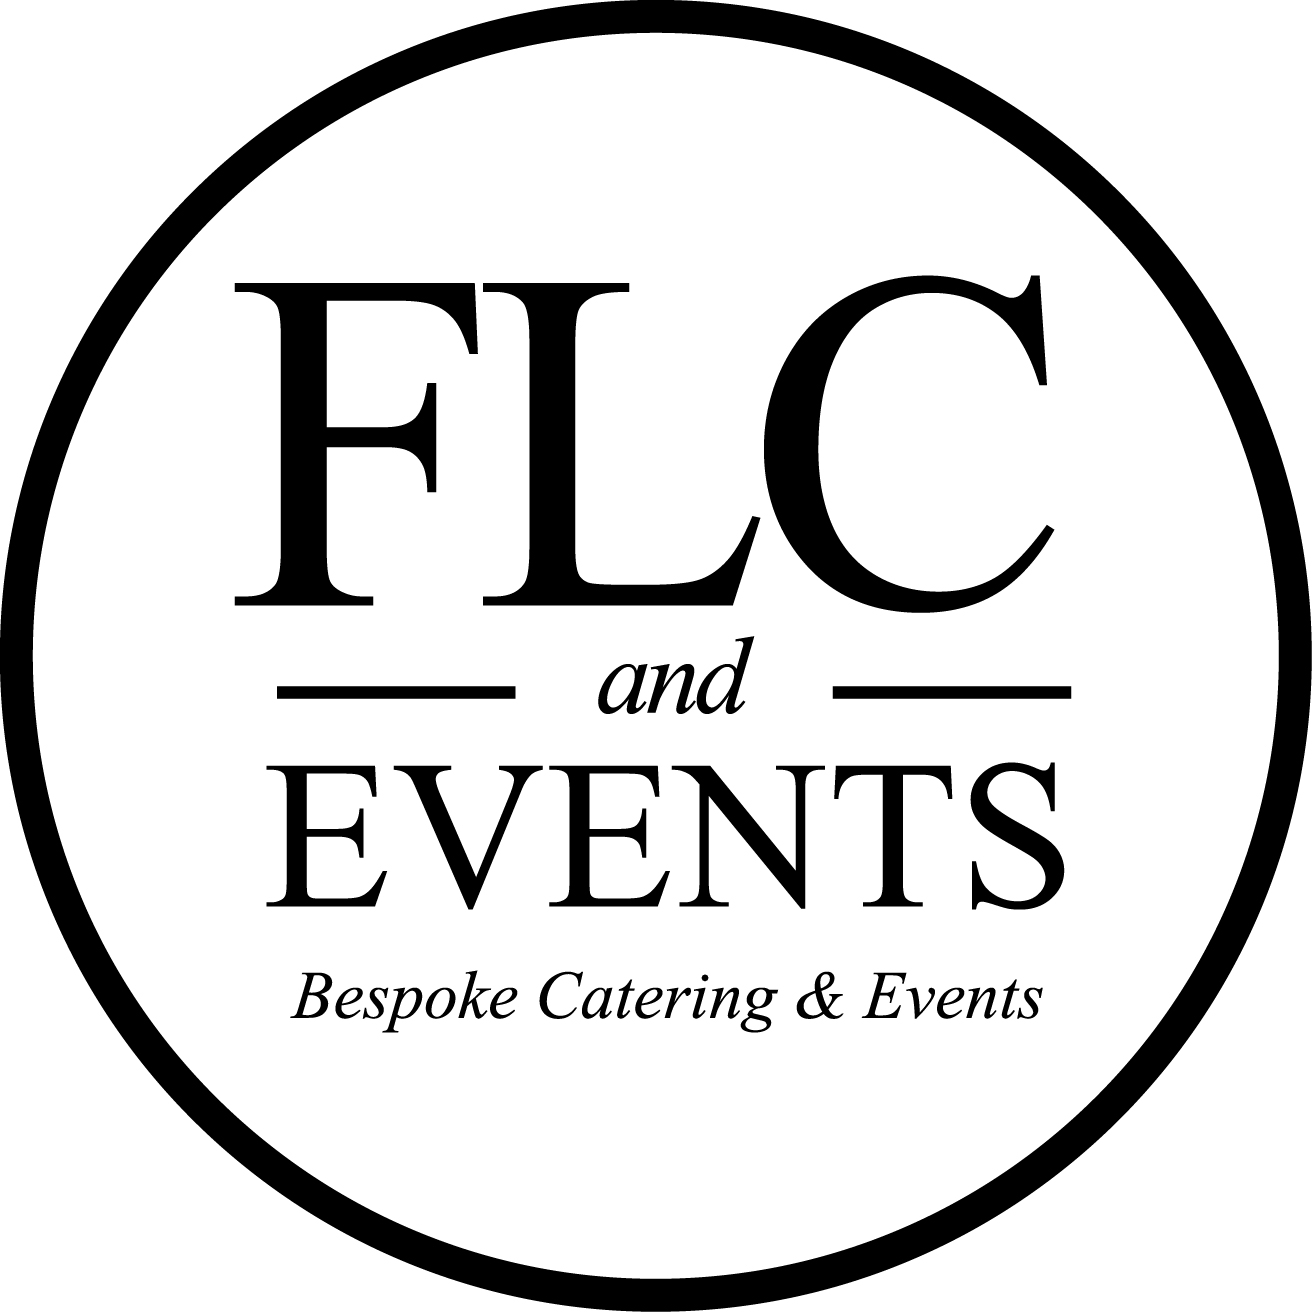 Food Lovers Catering and Events – Bespoke Catering and Events